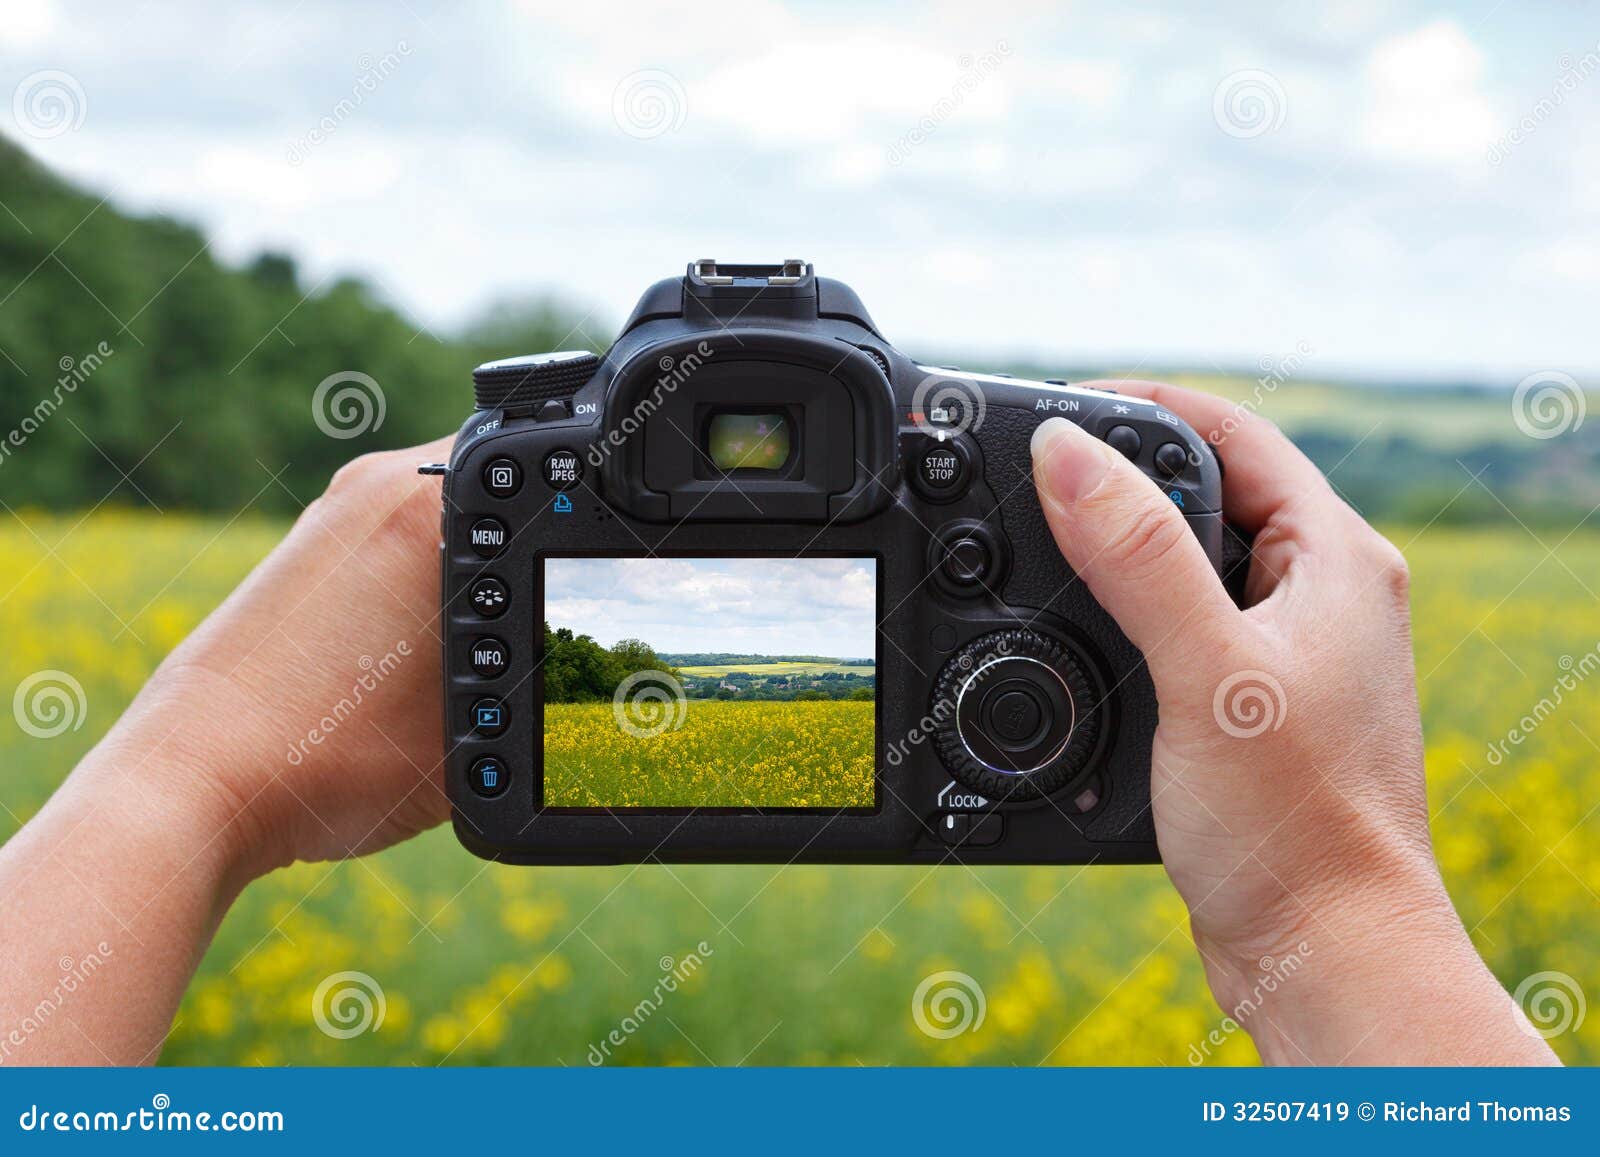 using dslr camera to take photo woman looking rear lcd screen compose landscape her liveview 32507419